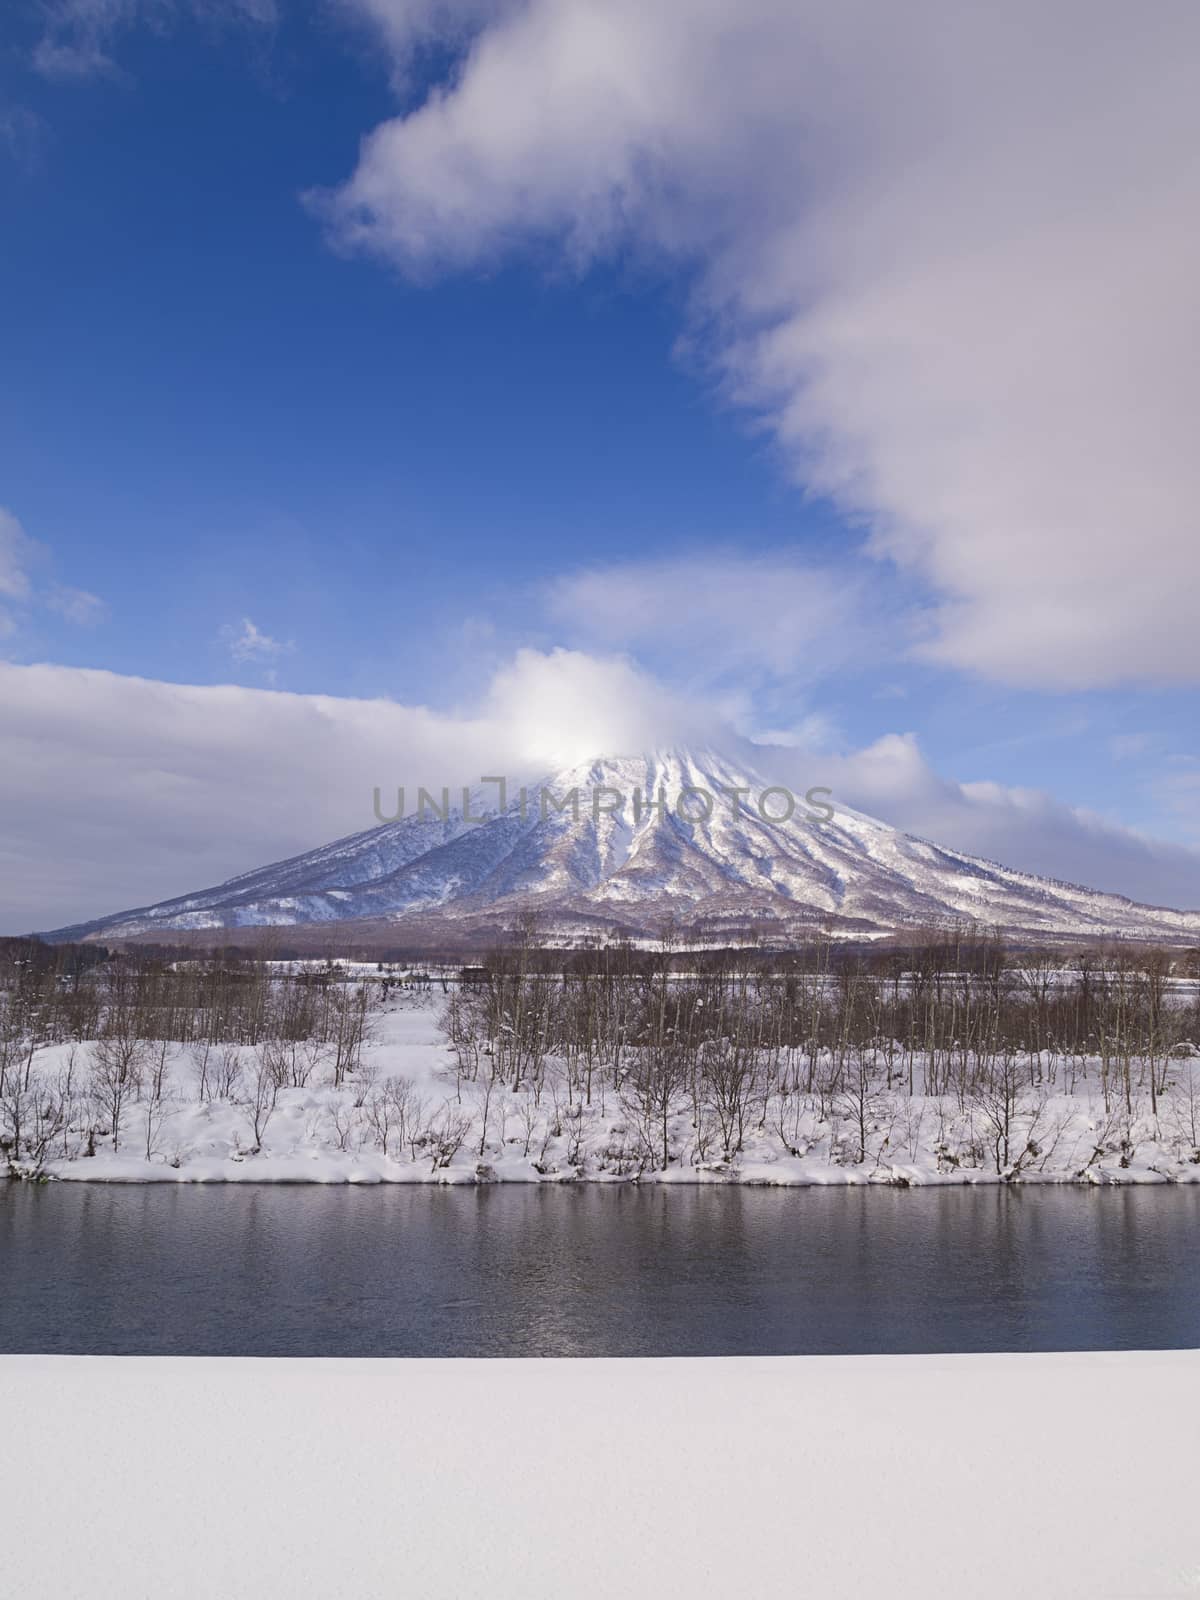 Mount Yotei, an active stratovolcano located in Shikotsu-Toya National Park, Hokkaido, Japan. It is one of the 100 famous mountains in Japan.